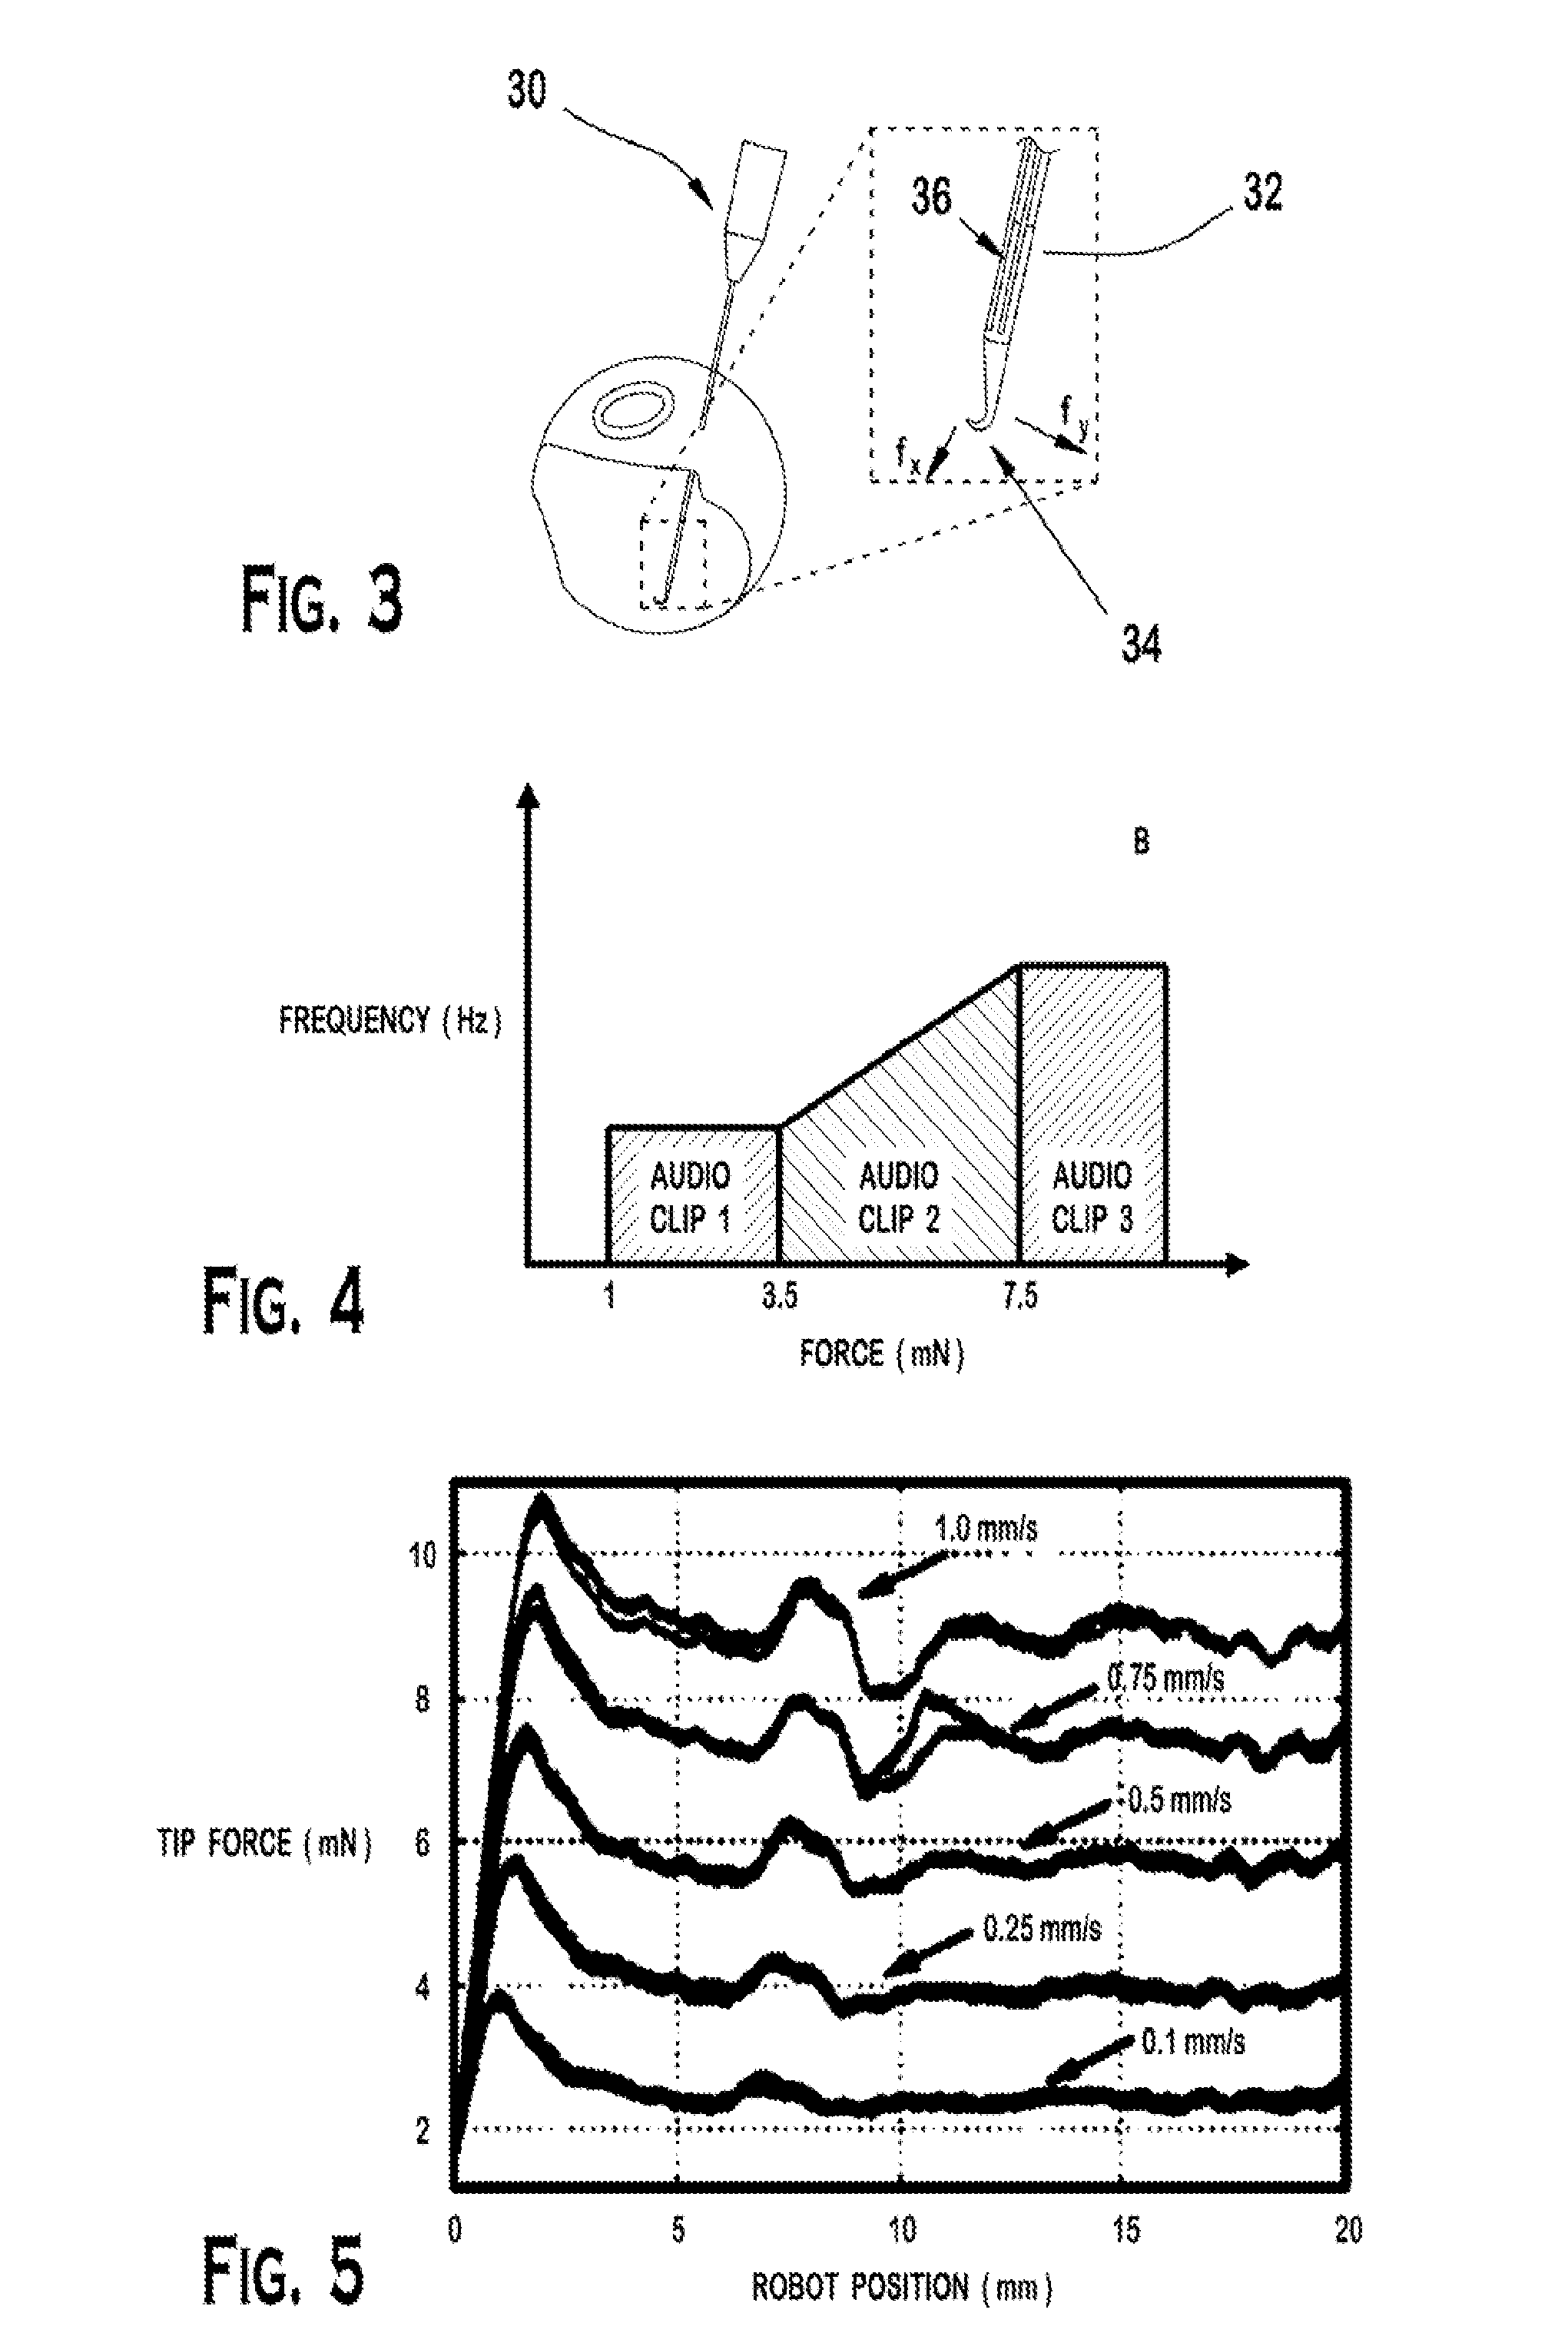 Method for presenting force sensor information using cooperative robot control and audio feedback